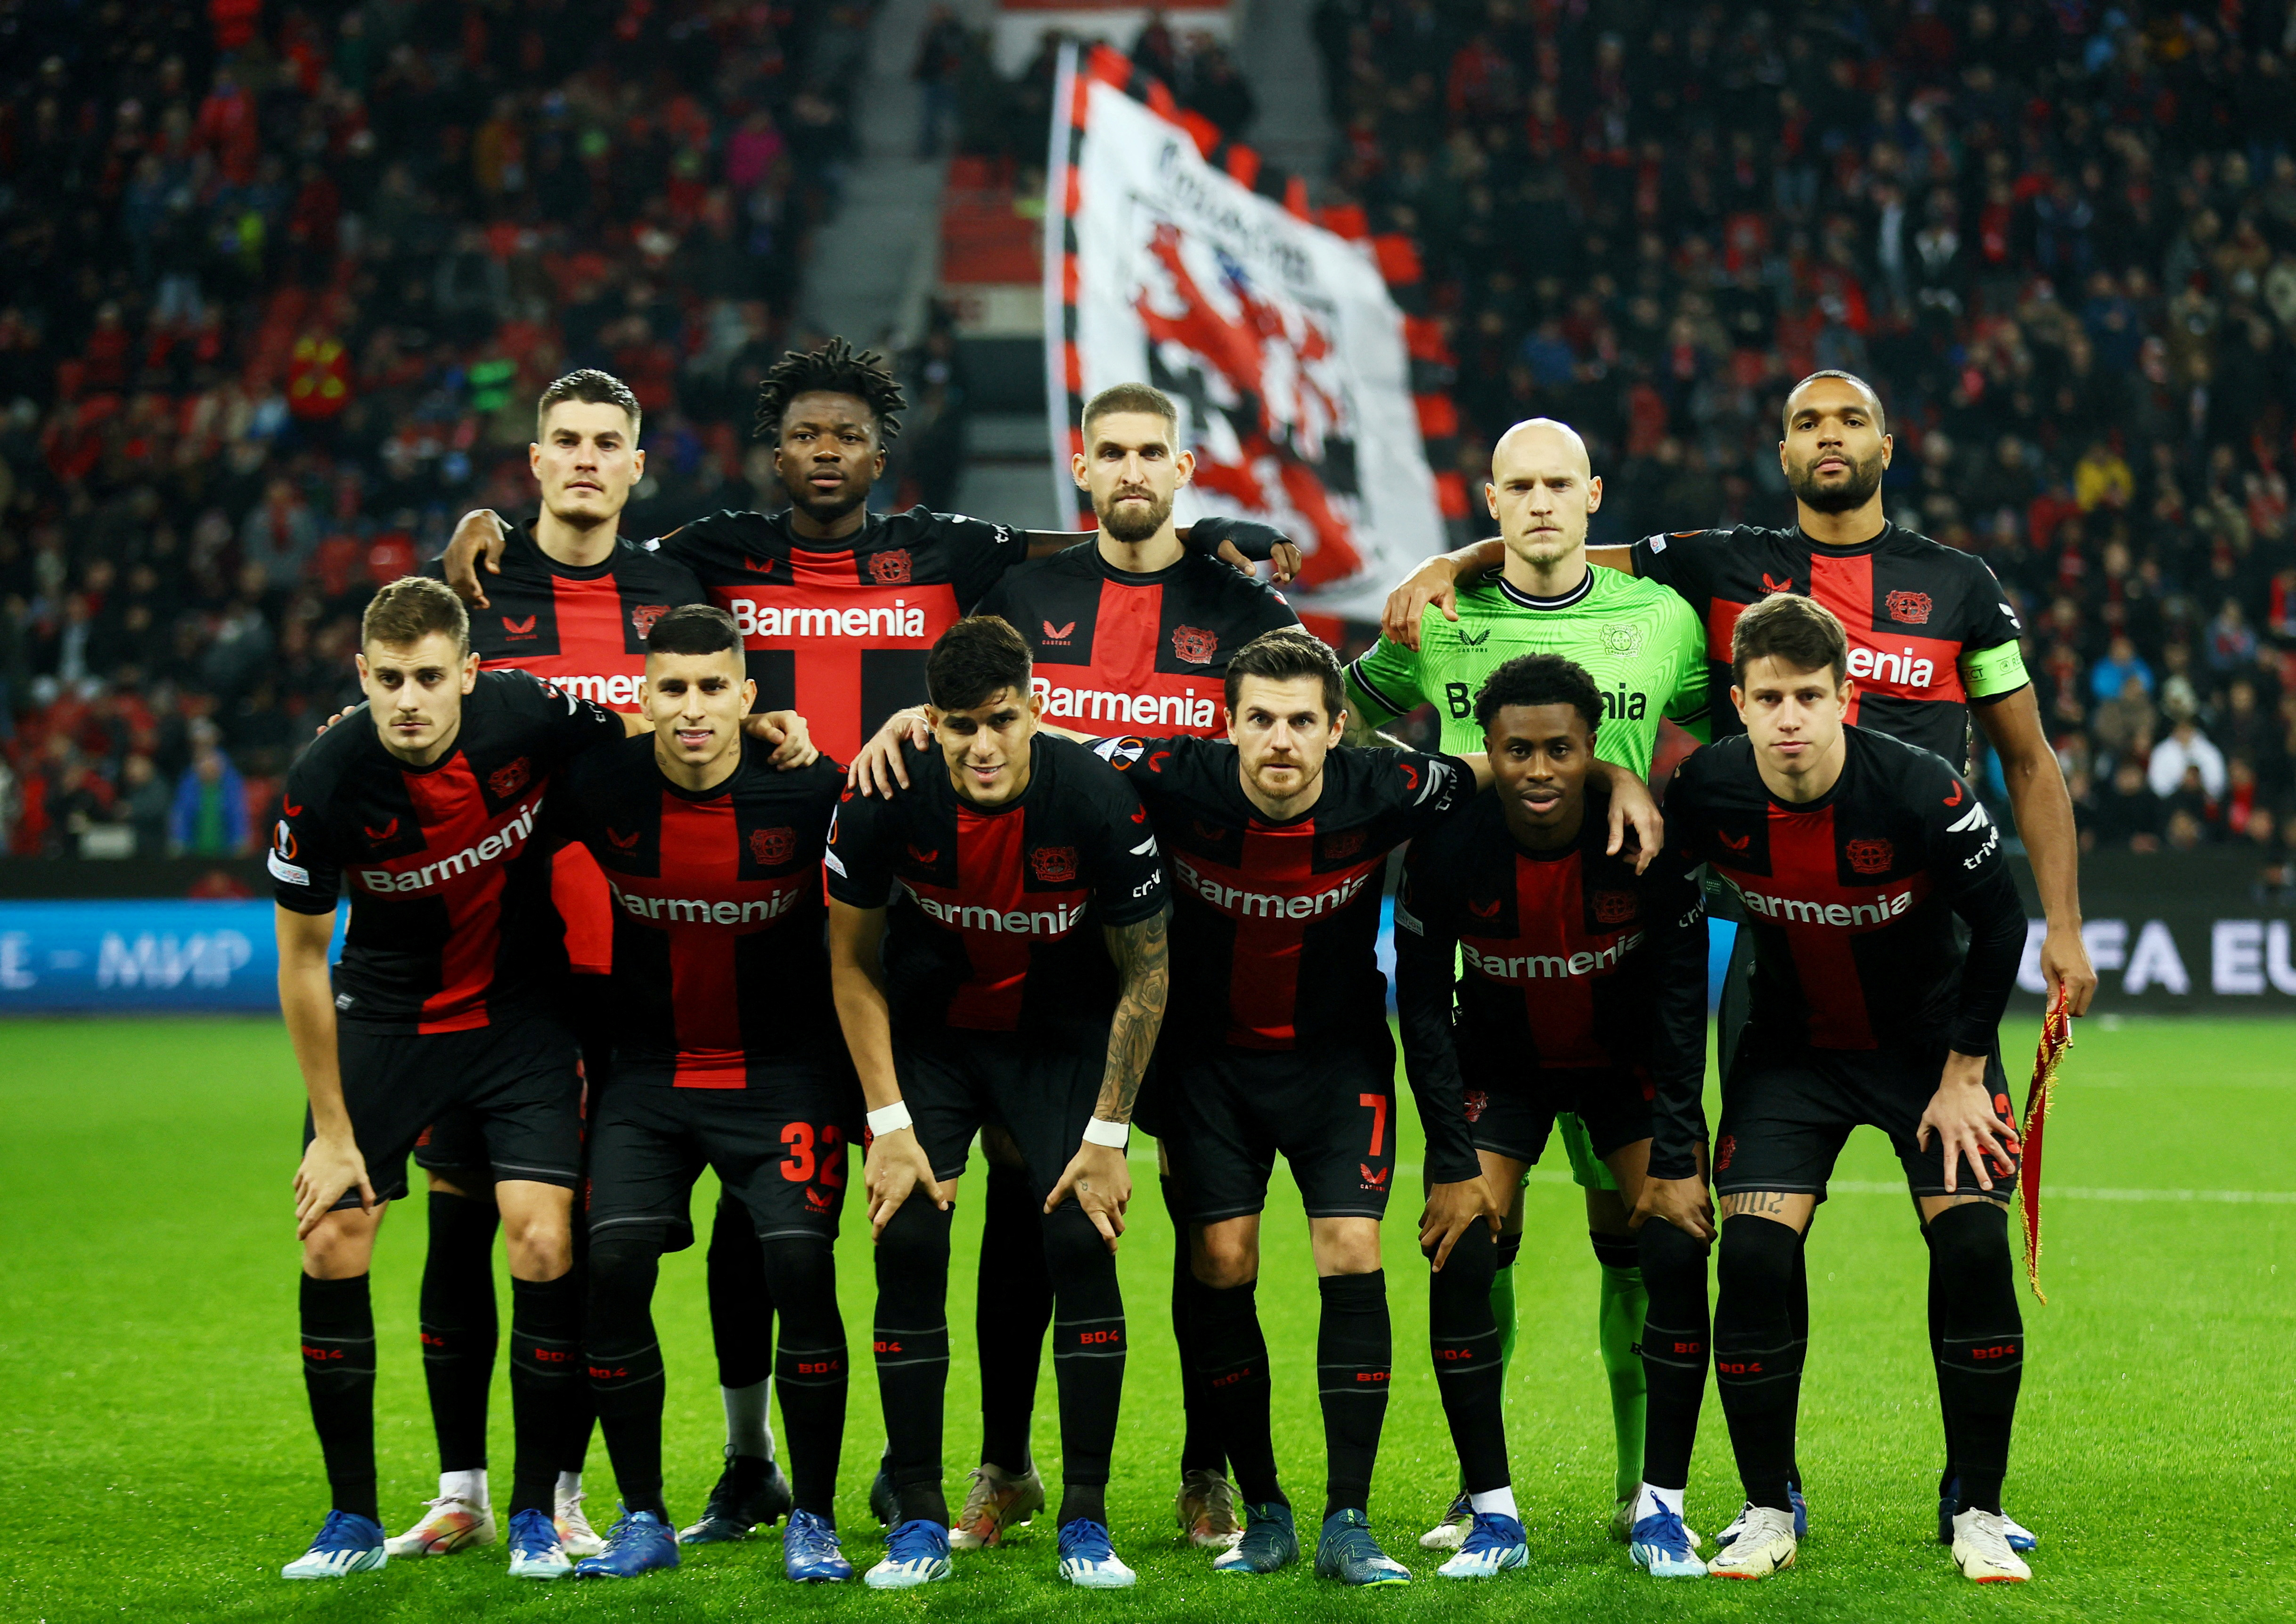 Leverkusen's pre-season planning is paying off now says sports director |  Reuters